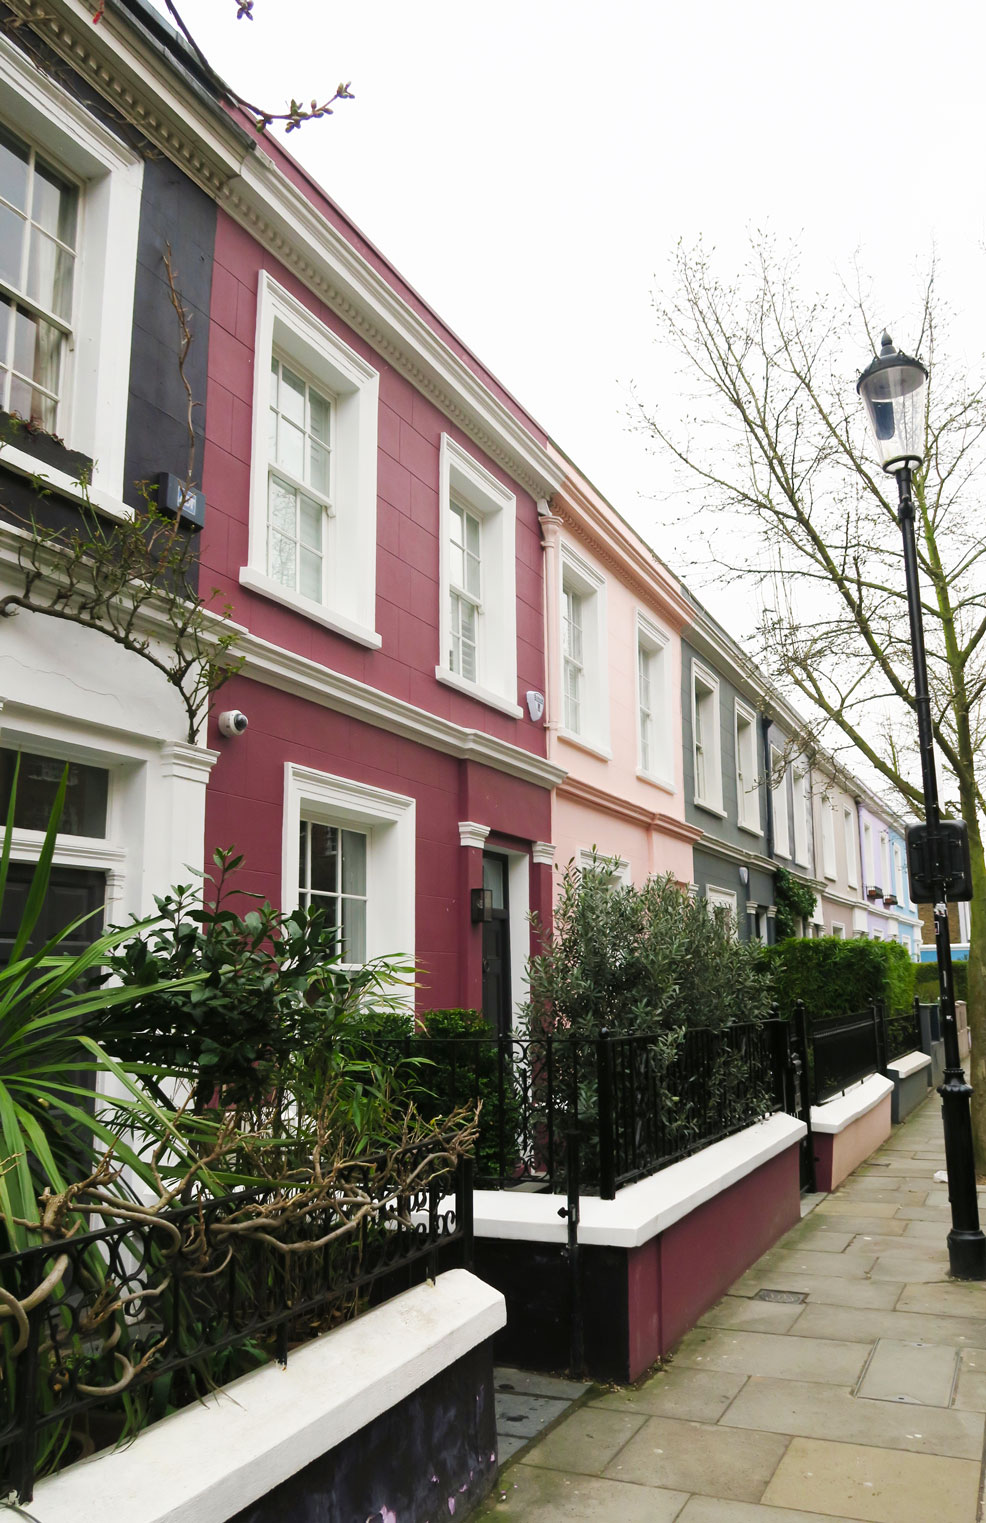 notting hill street of beautiful houses